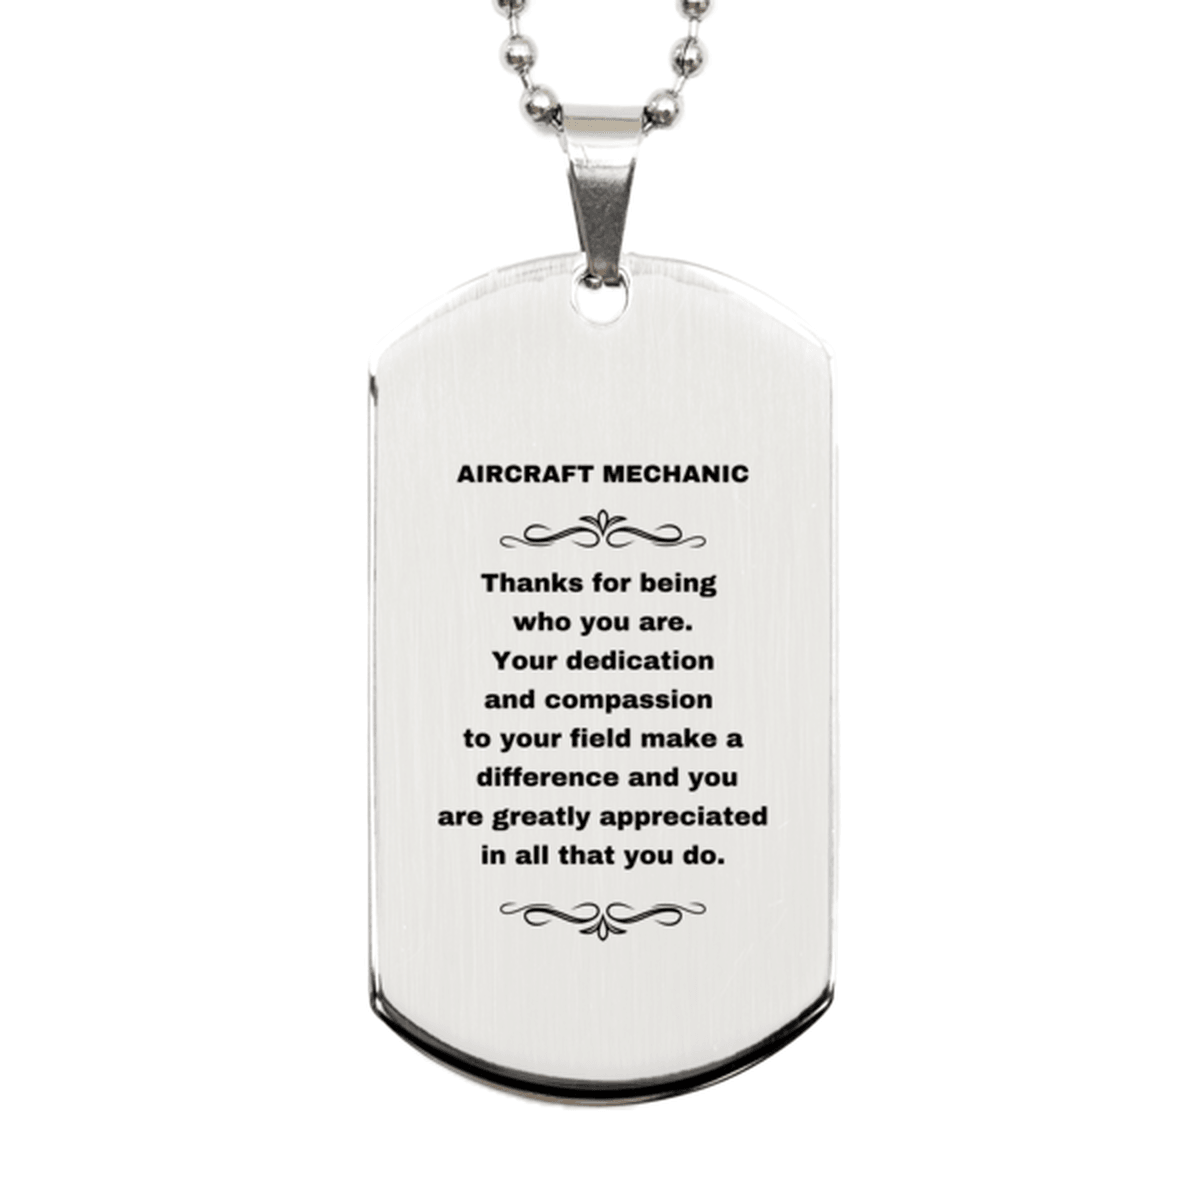 Aircraft Mechanic Silver Dog Tag Engraved Necklace - Thanks for being who you are - Birthday Christmas Jewelry Gifts Coworkers Colleague Boss - Mallard Moon Gift Shop